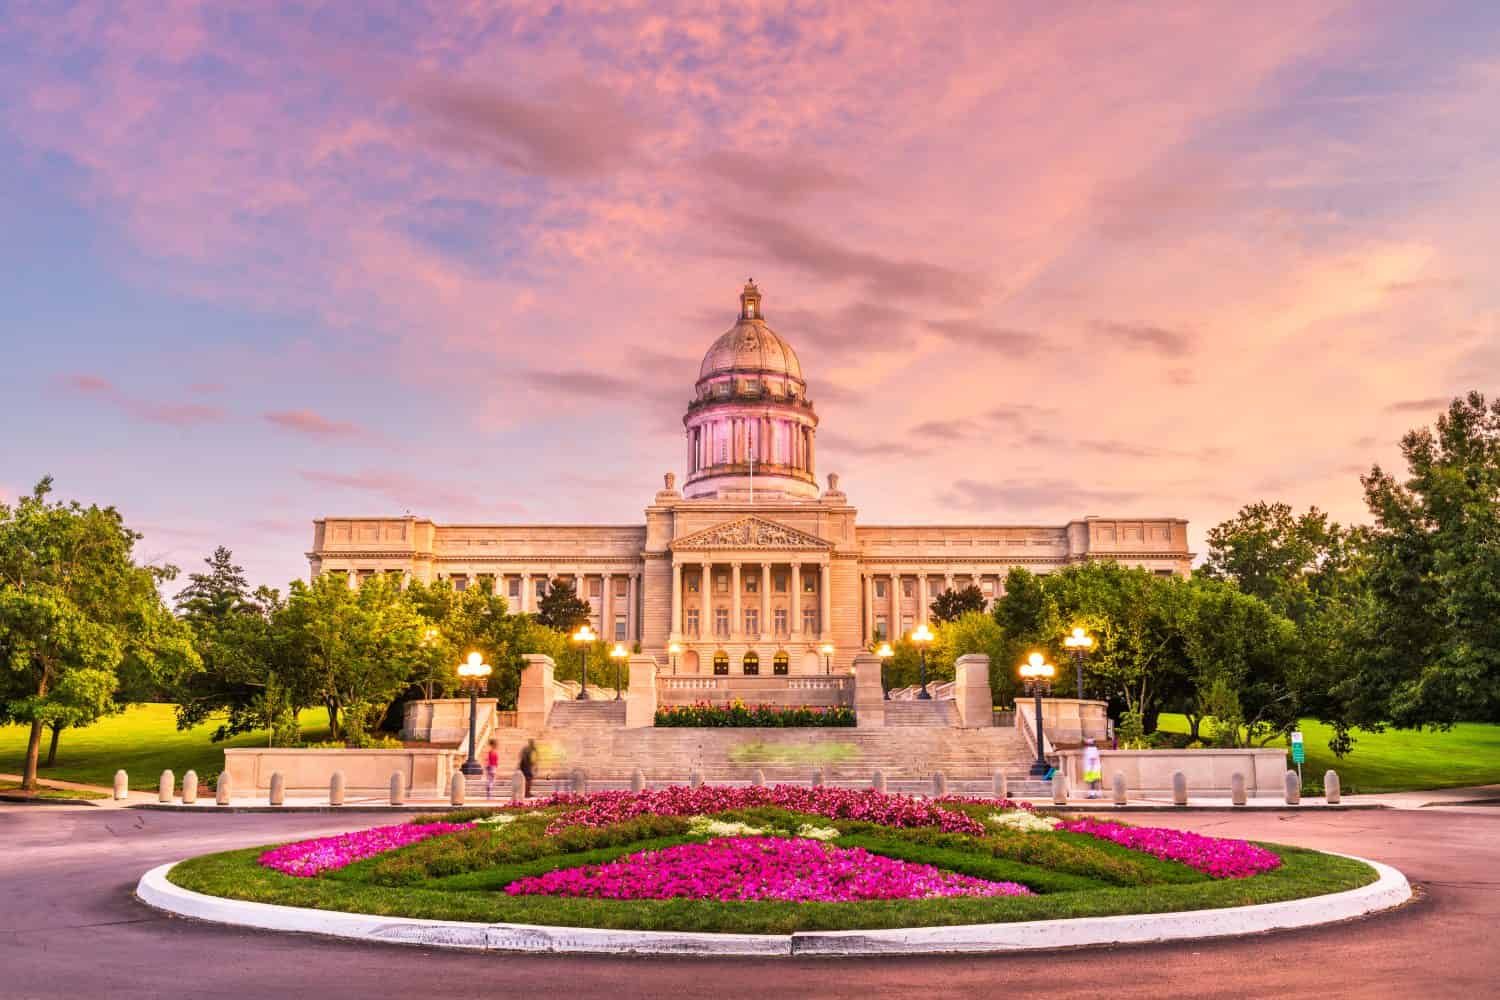 Frankfort, Kentucky, USA with the Kentucky State Capitol at dusk.